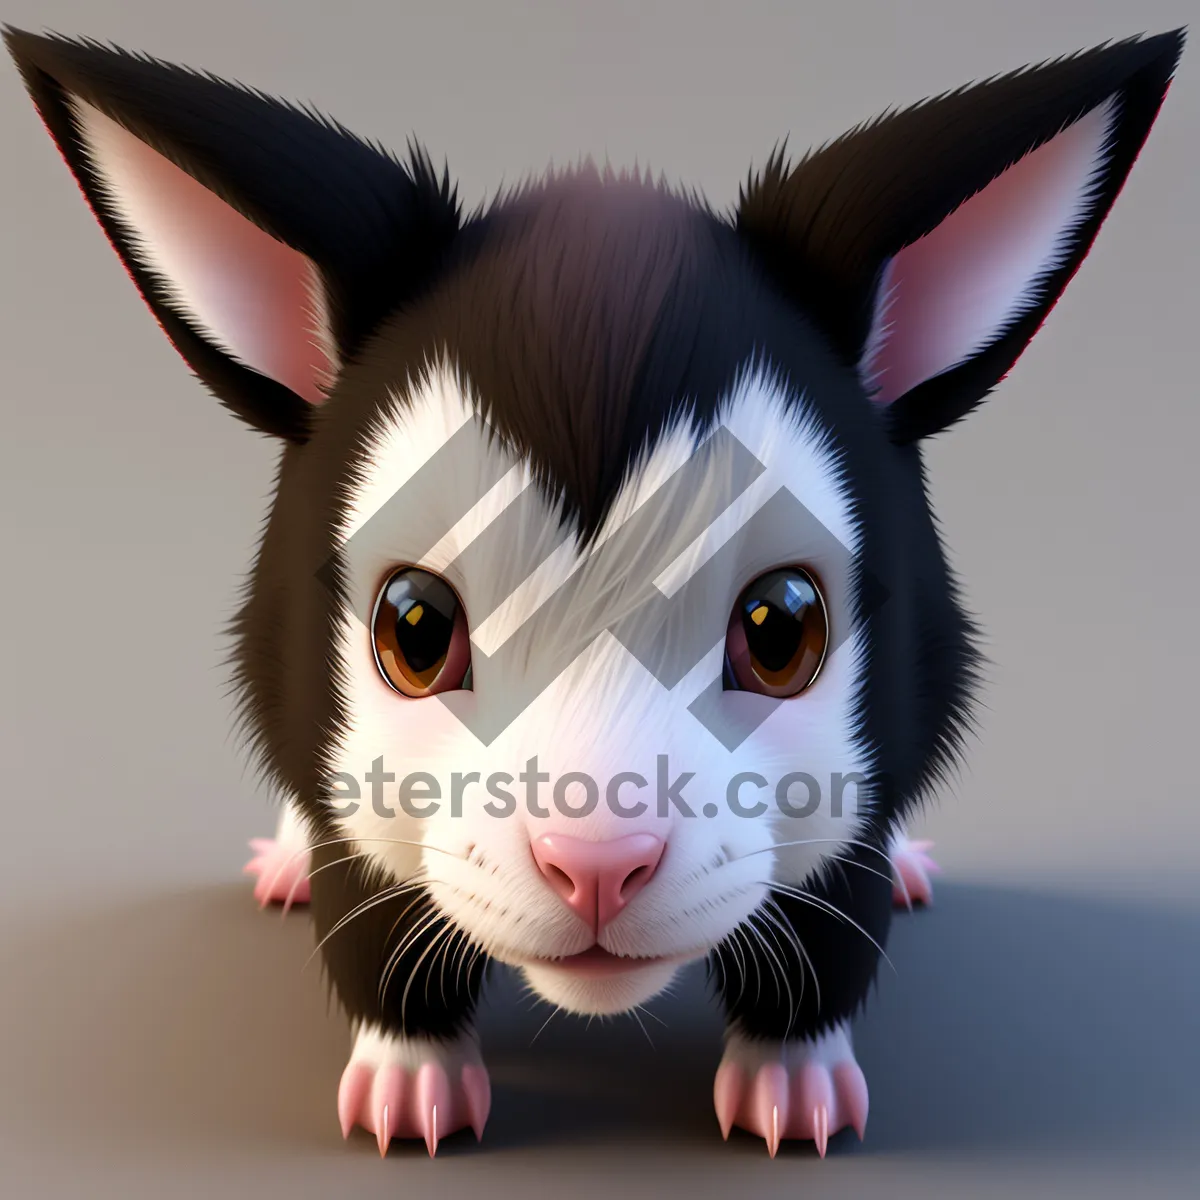 Picture of Fluffy Bunny with Cute Ears in Studio Portrait.